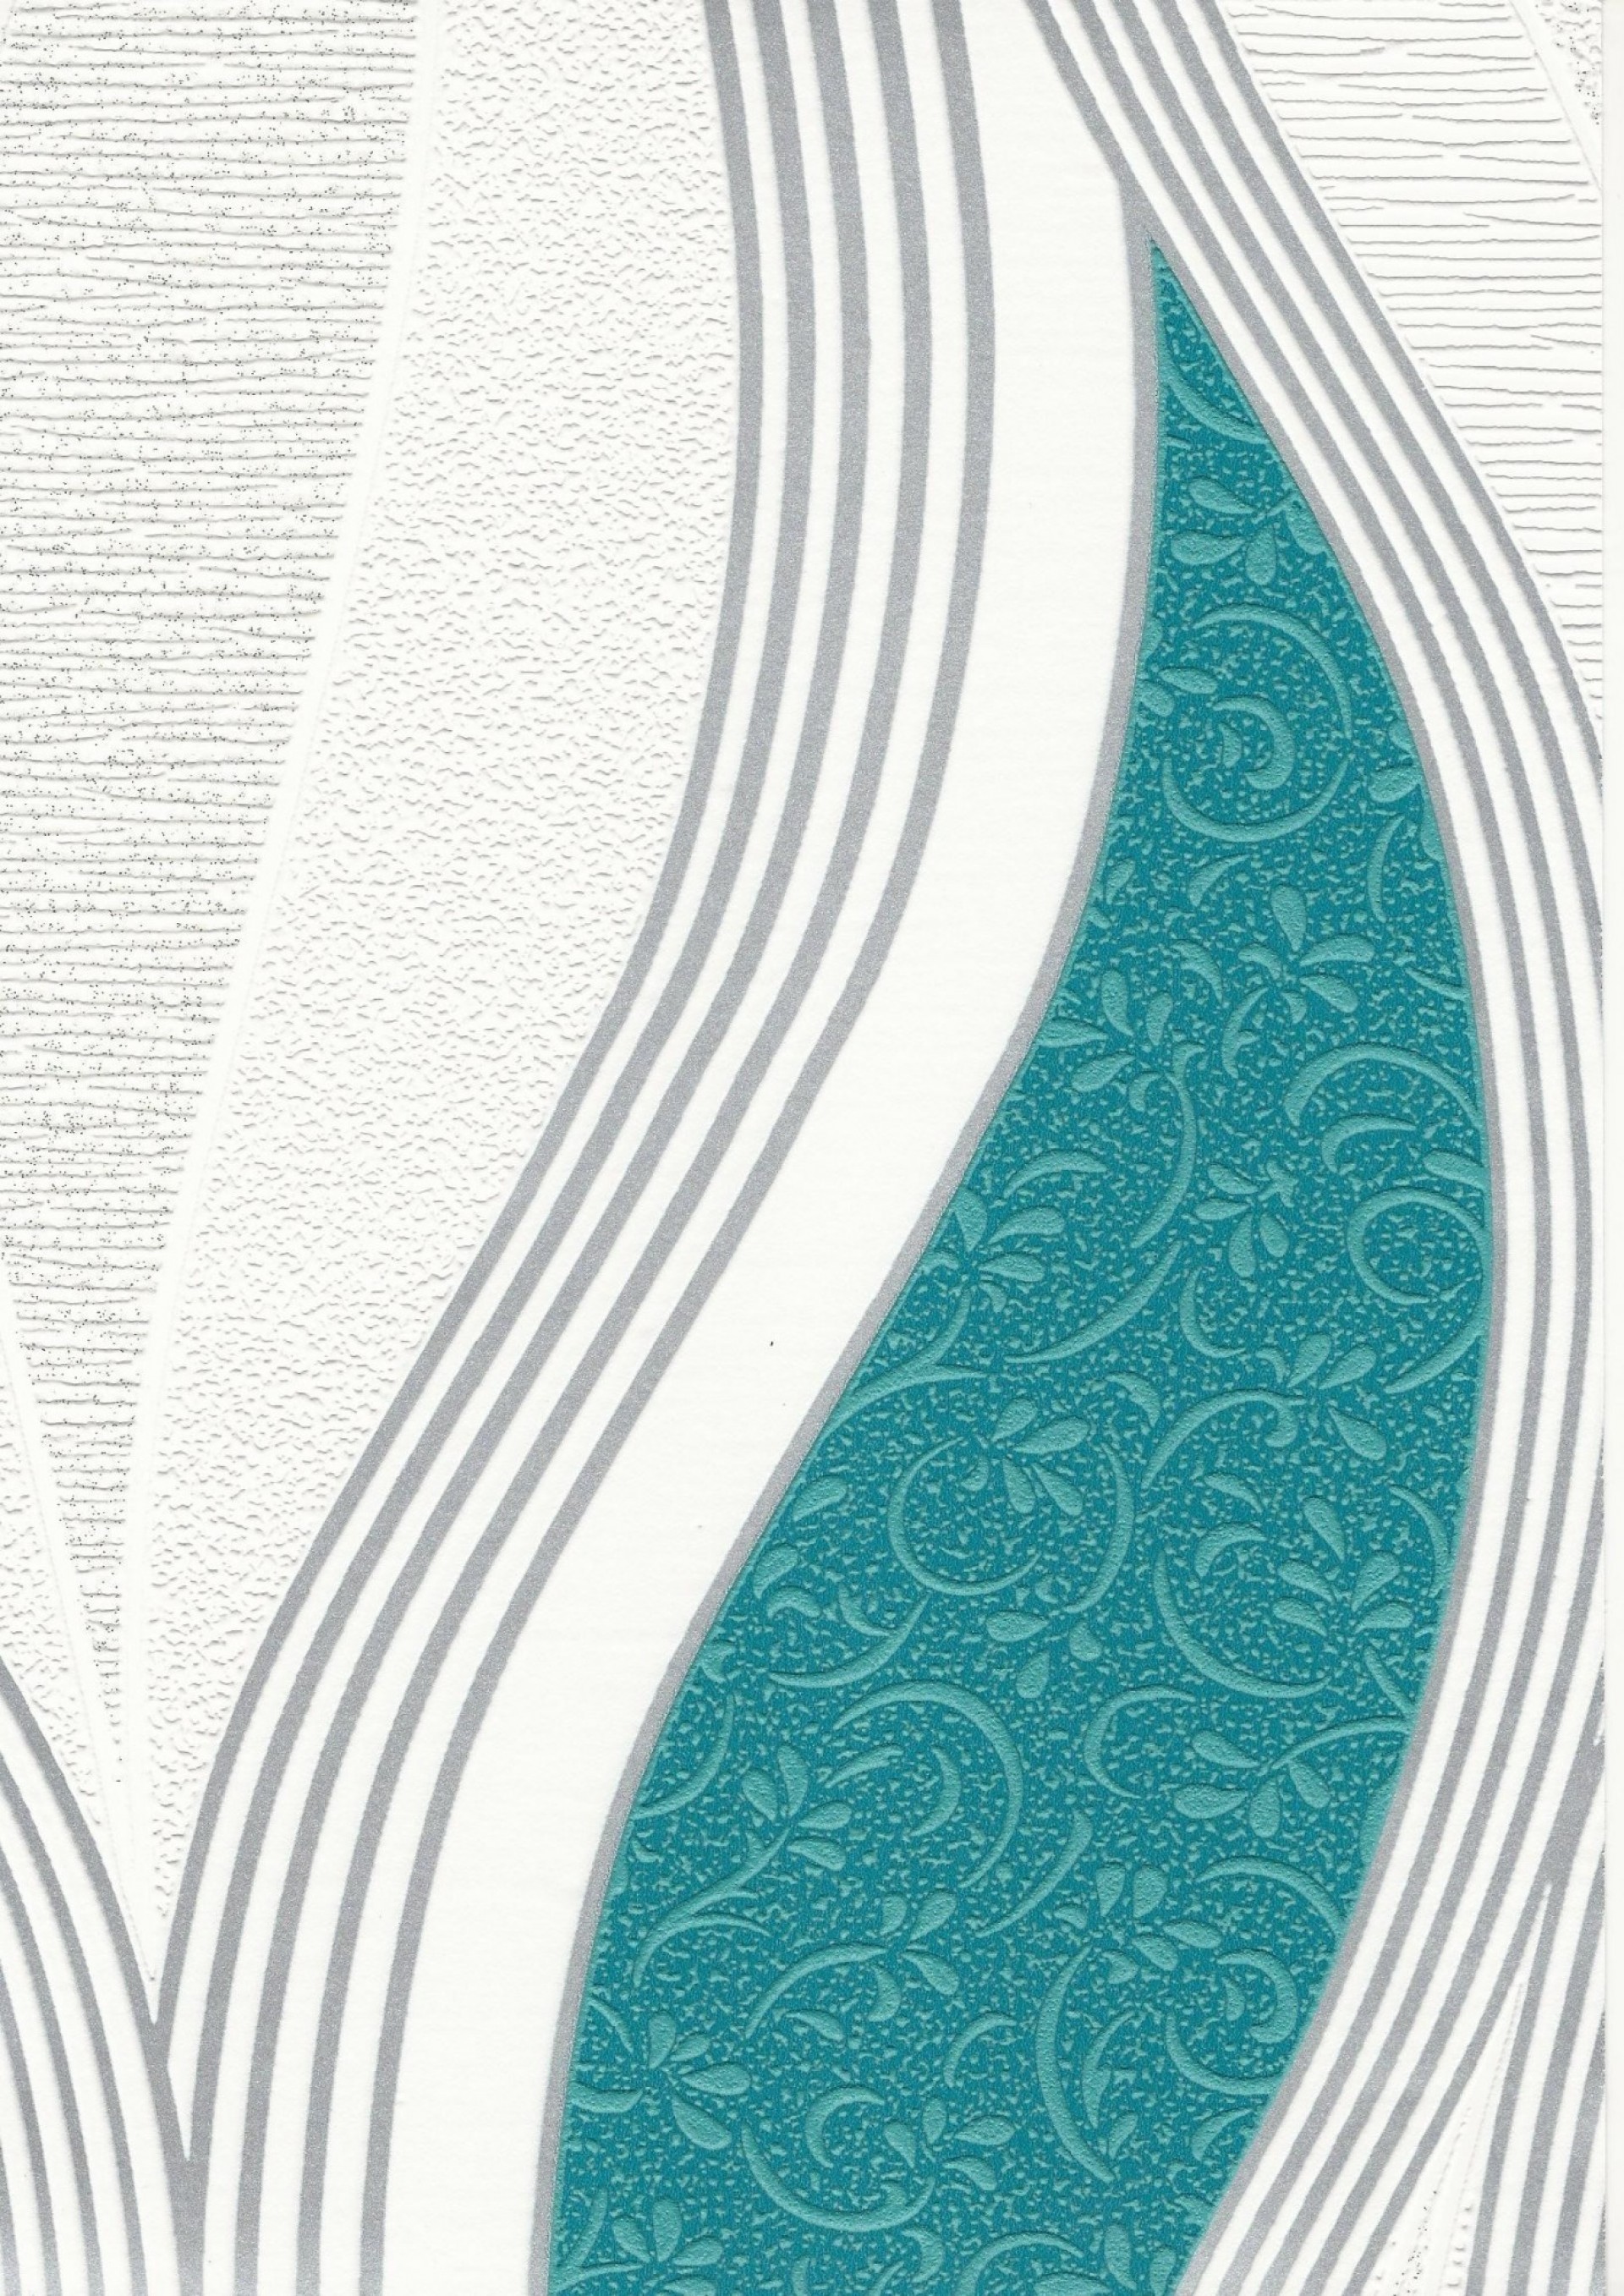 Metallic Waves Teal / White Textured Vinyl Wallpaper by Direct E62001